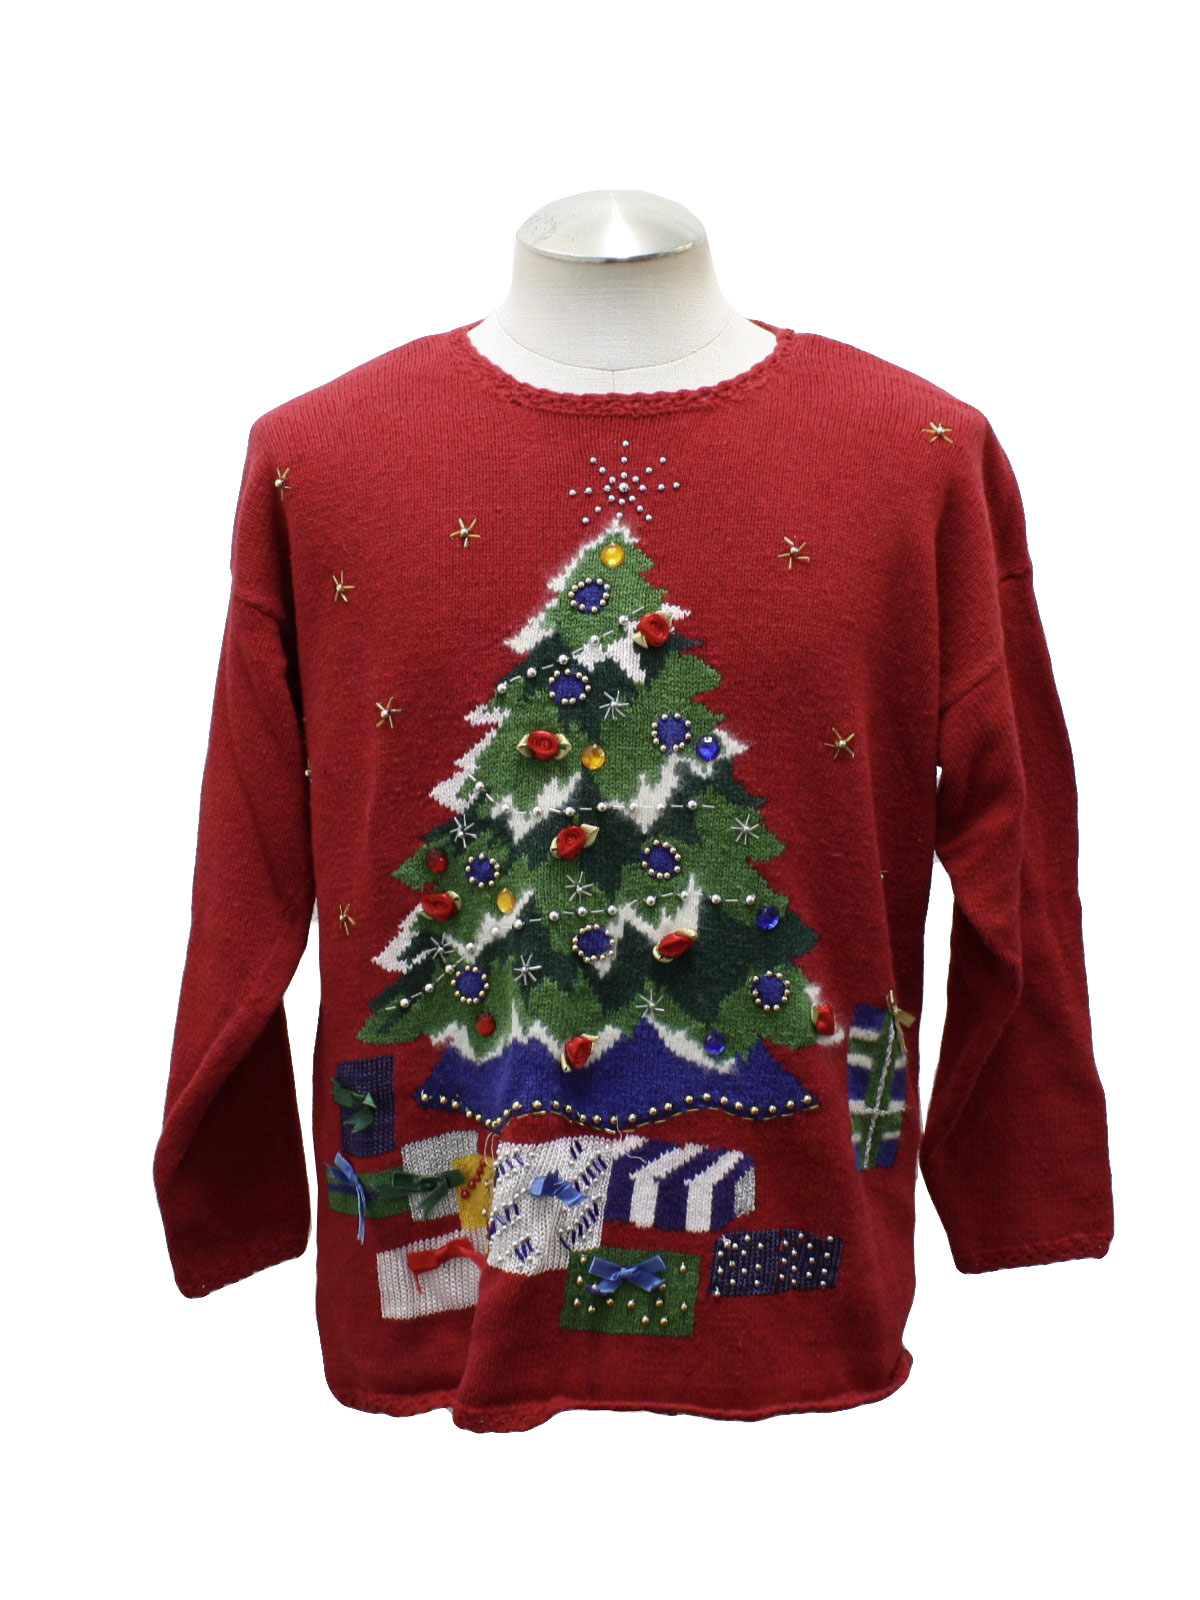 Ugly Christmas Sweater: -Carly St. Clair- Unisex red with evergreen ...